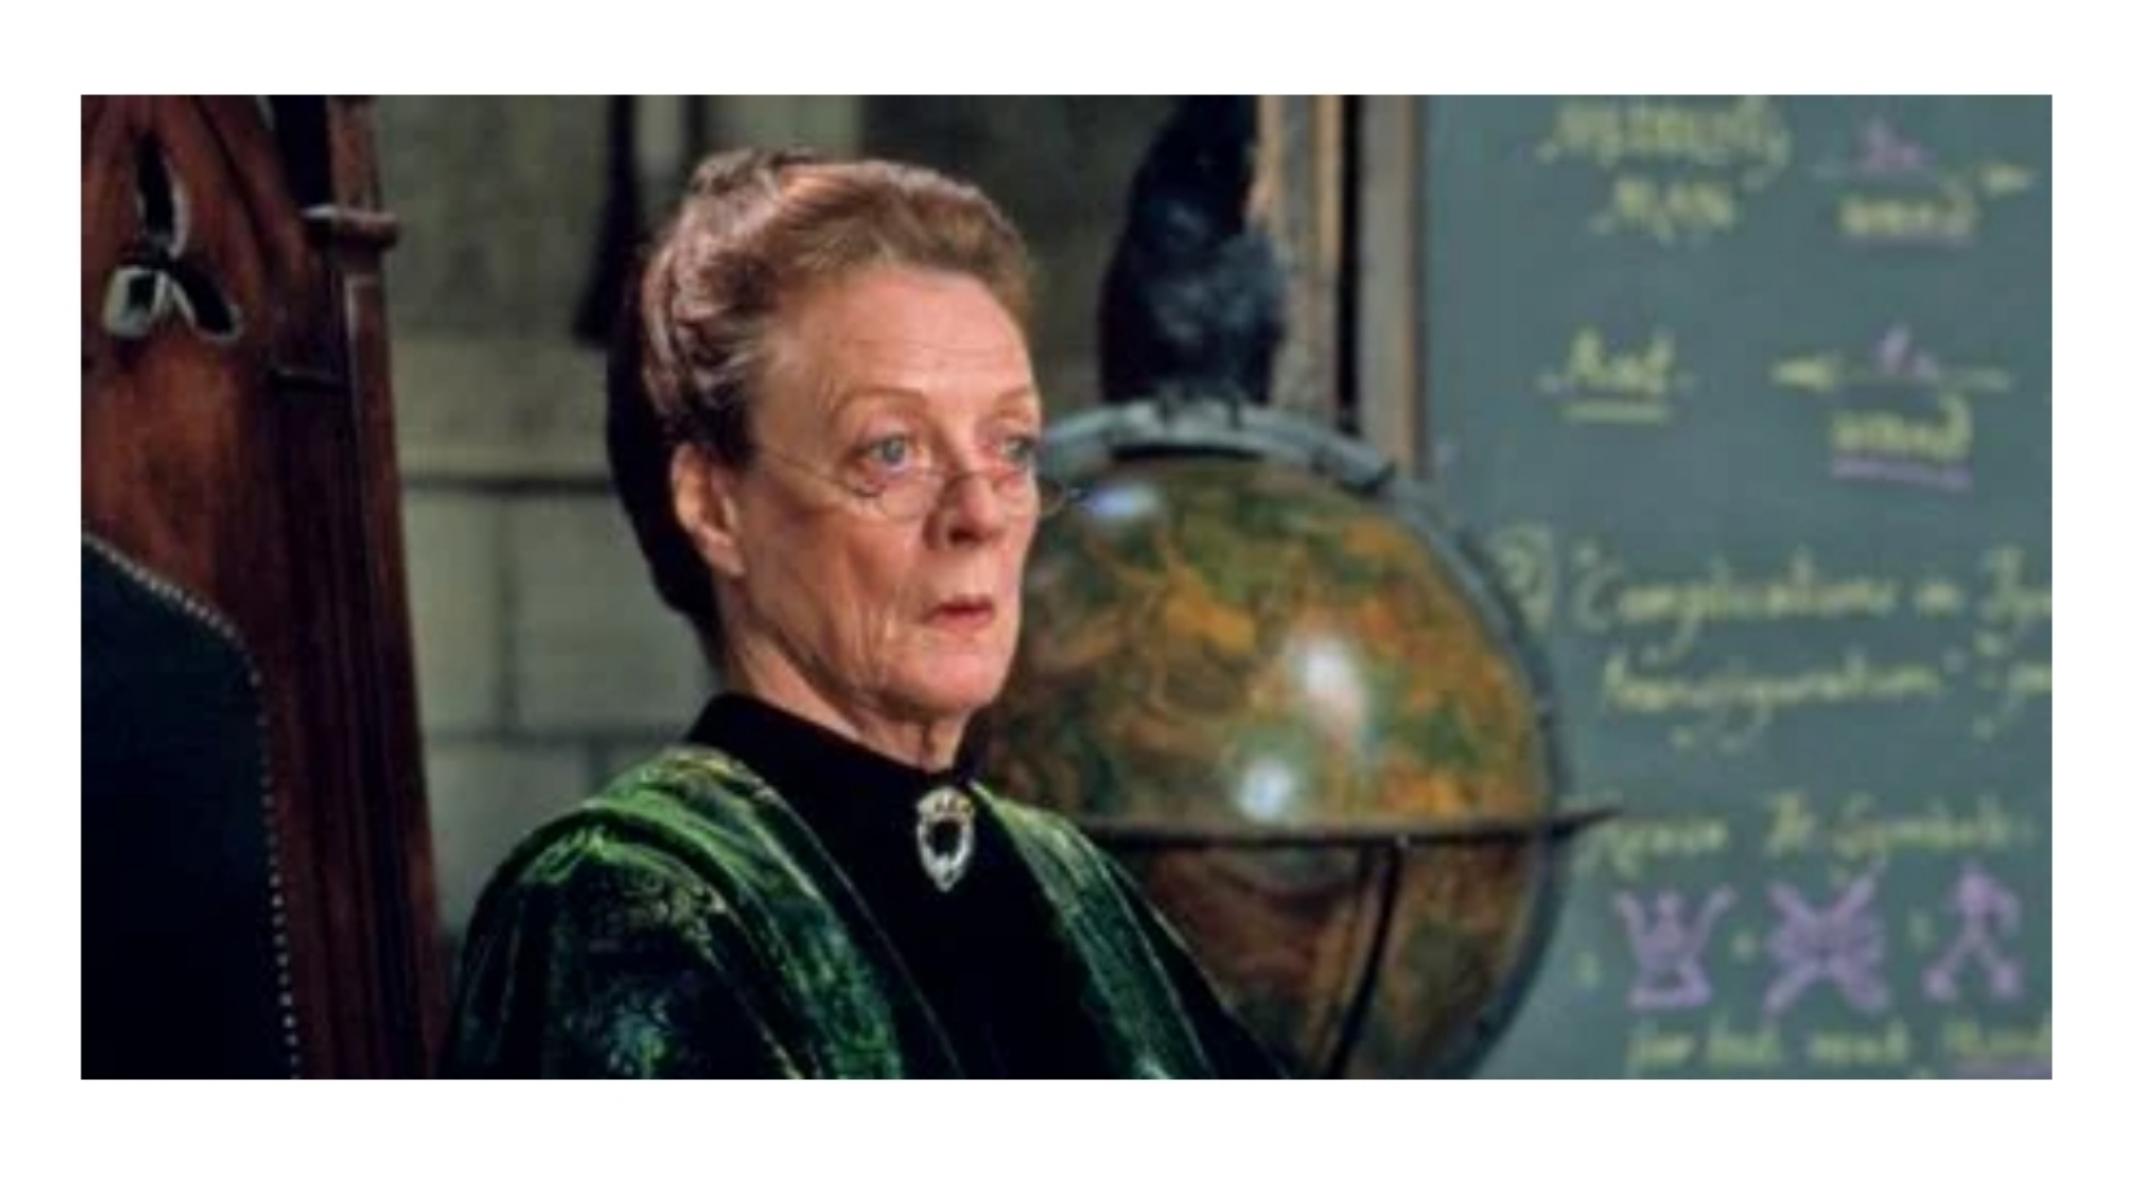 2.Minerva McGonagall Is A Master-Class Witch